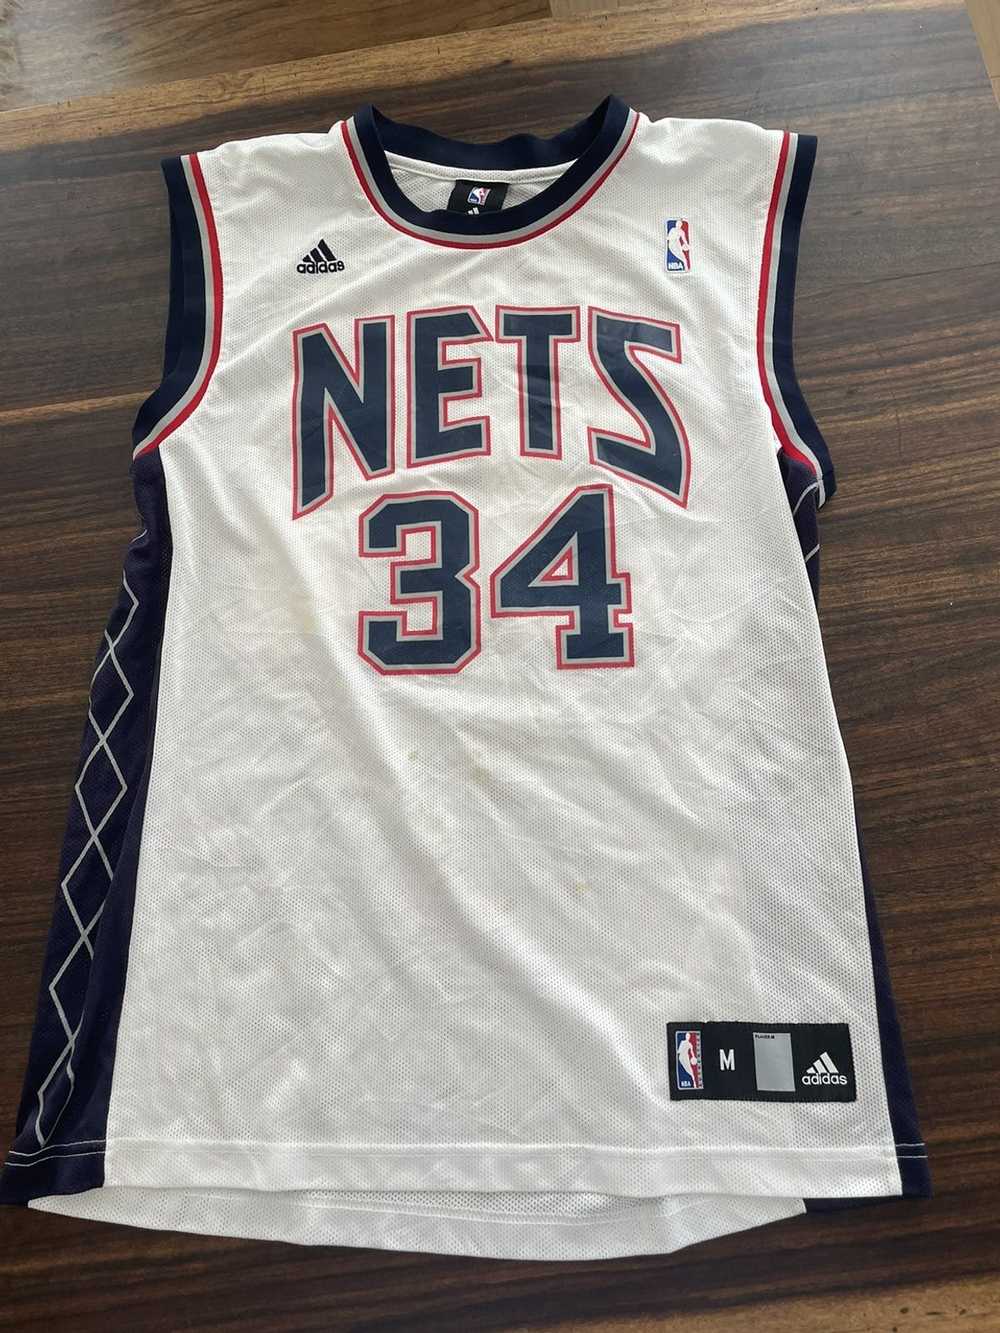 Keith Van Horn Nets Jersey sz 52/XXL New w. Tags – First Team Vintage